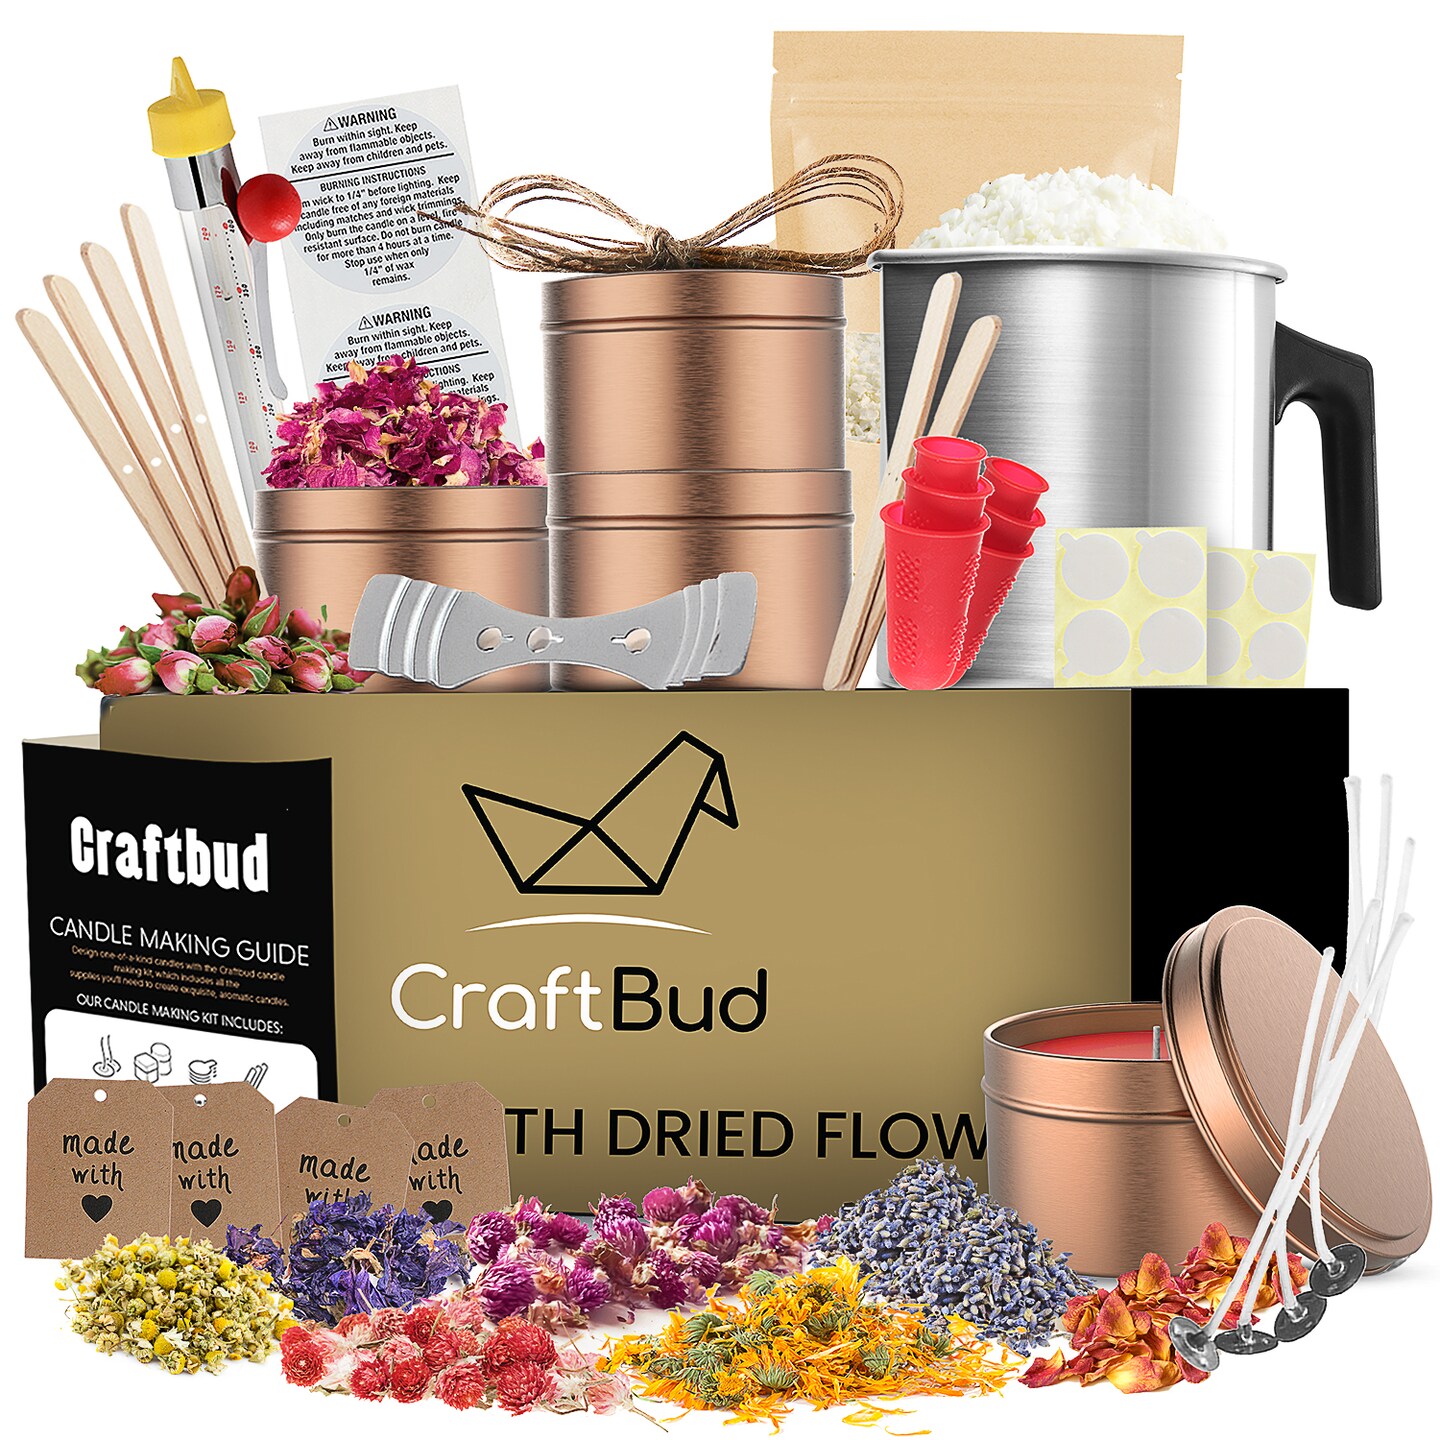 CraftBud DIY Natural Soy Candle Making Kit with Dried Flowers